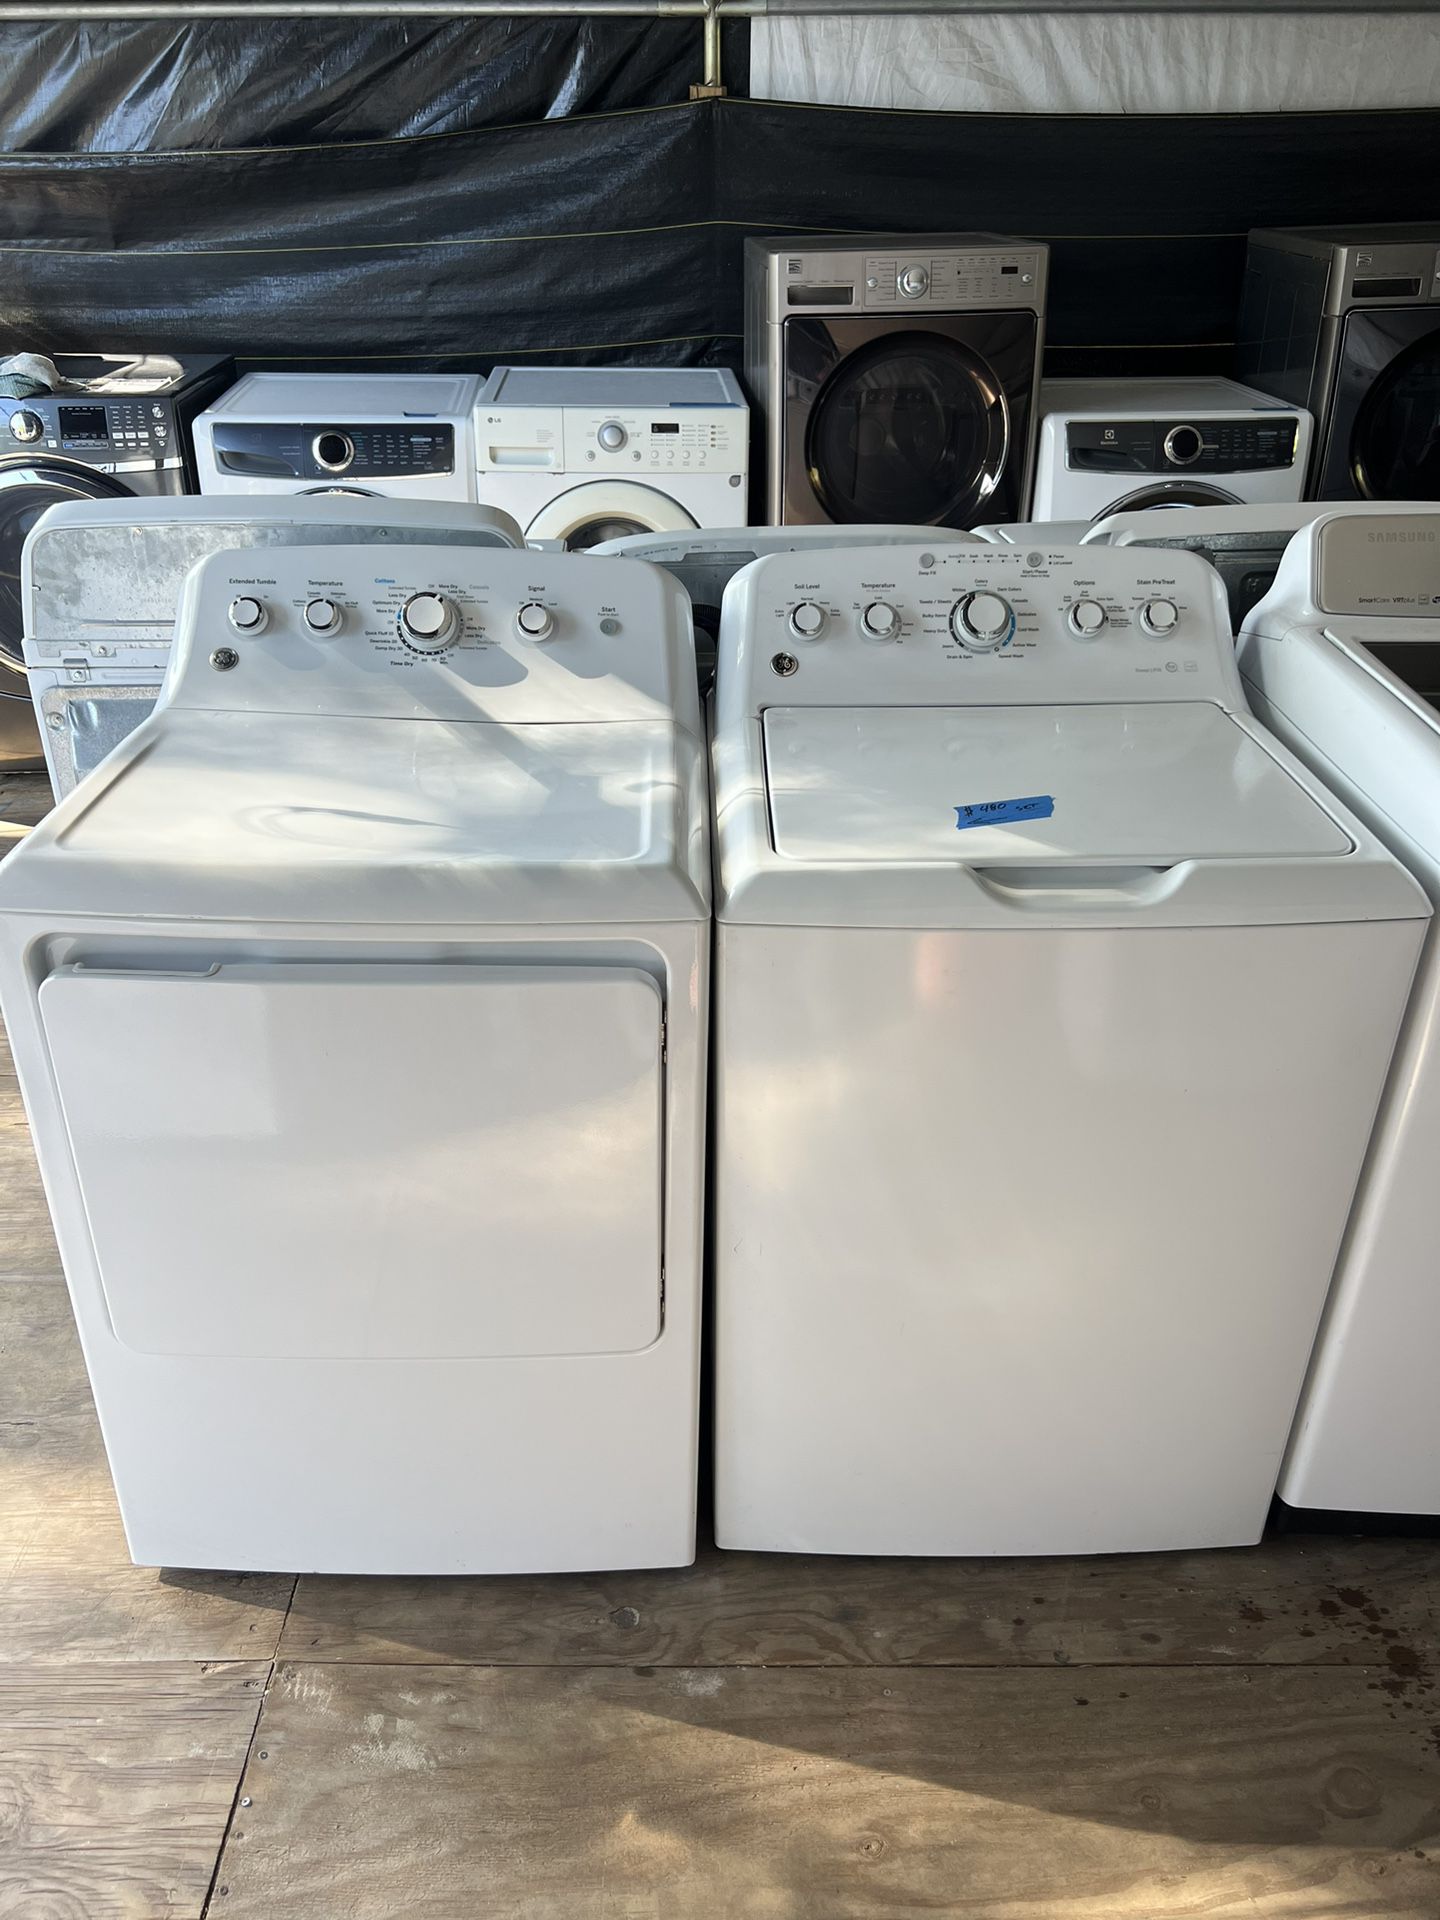 Ge Washer&dryer Large Capacity   60 day warranty/ Located at:📍5415 Carmack Rd Tampa Fl 33610📍